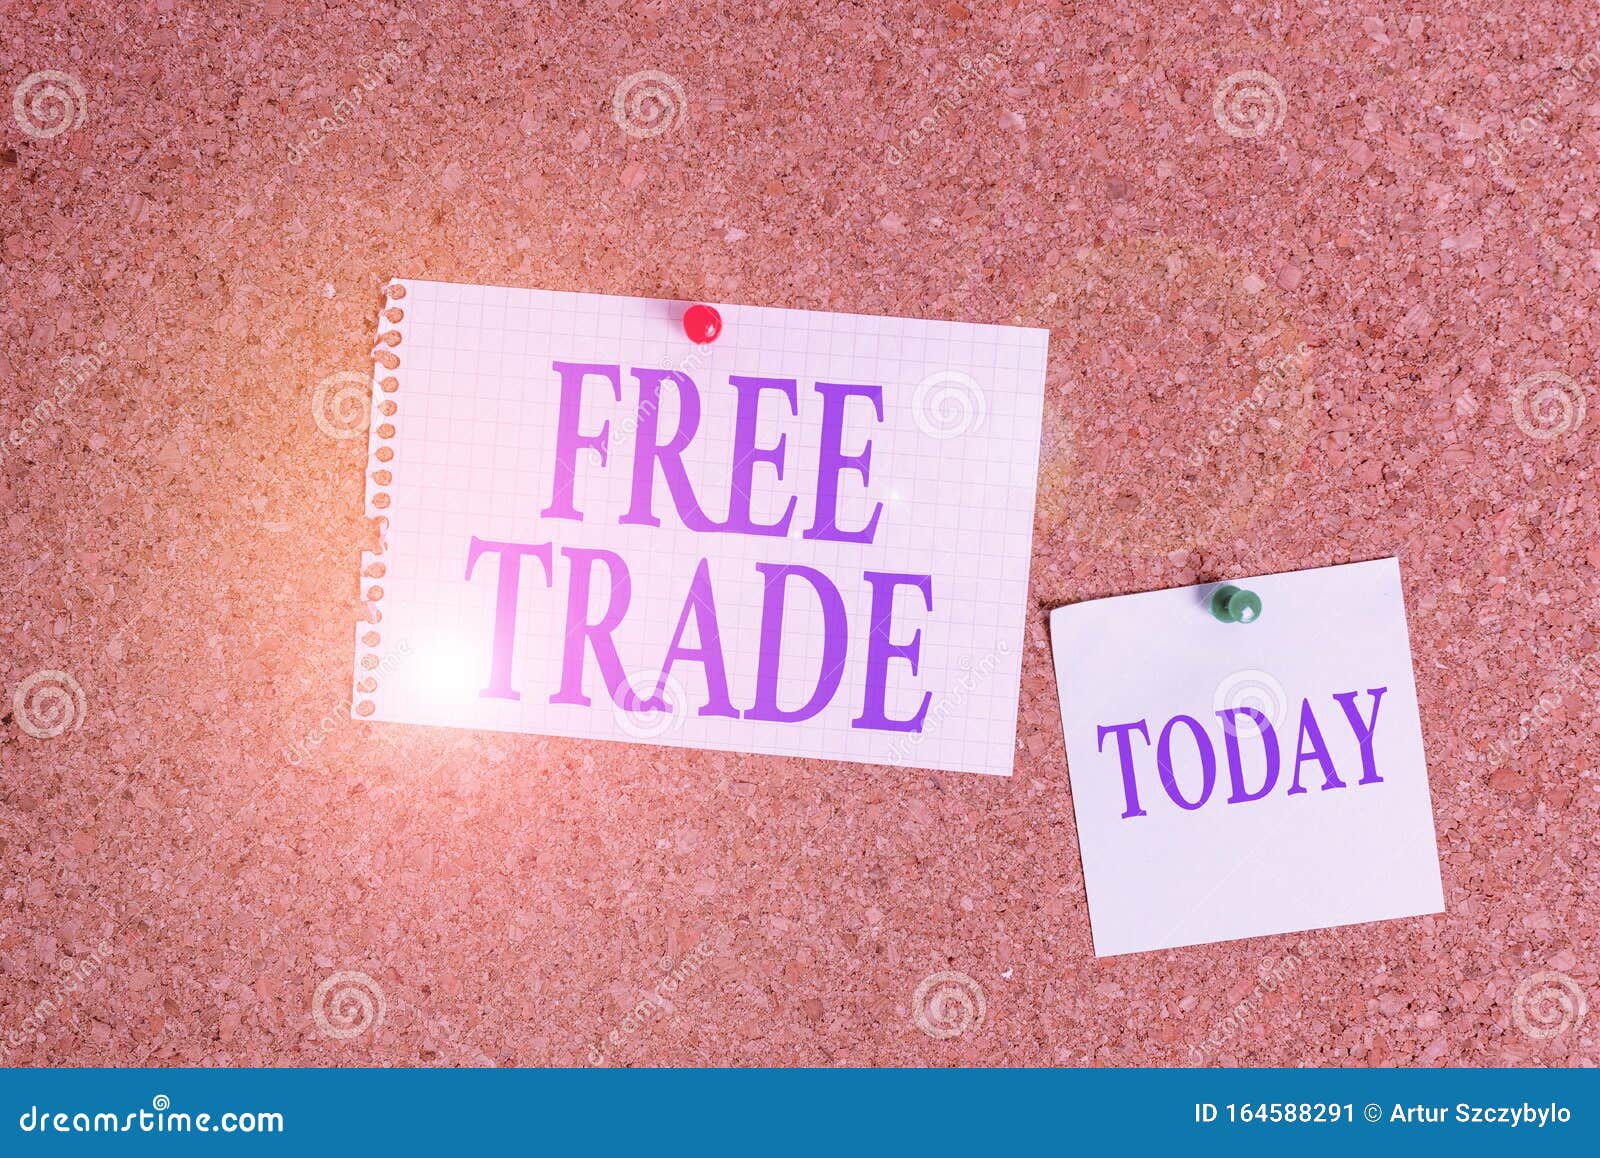 https://thumbs.dreamstime.com/z/handwriting-text-free-trade-concept-meaning-international-left-to-its-natural-course-tariffs-corkboard-color-size-164588291.jpg